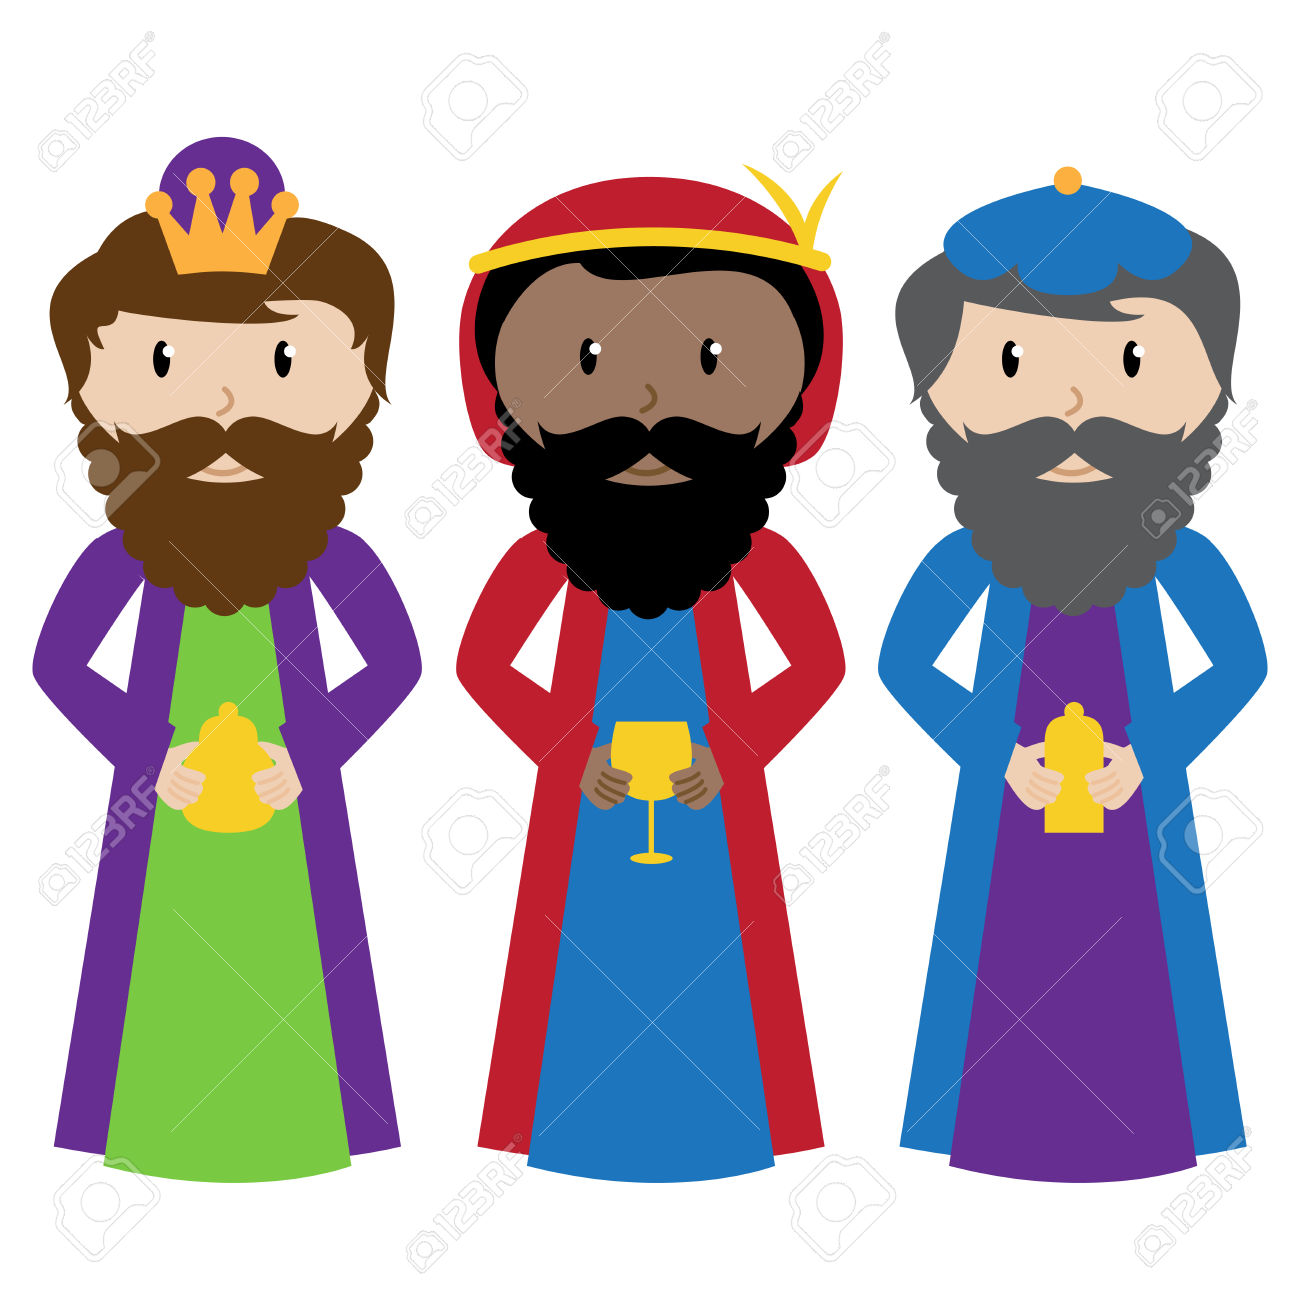 three wise men: Vector Collection of the Three Wise Men or Magi Illustration